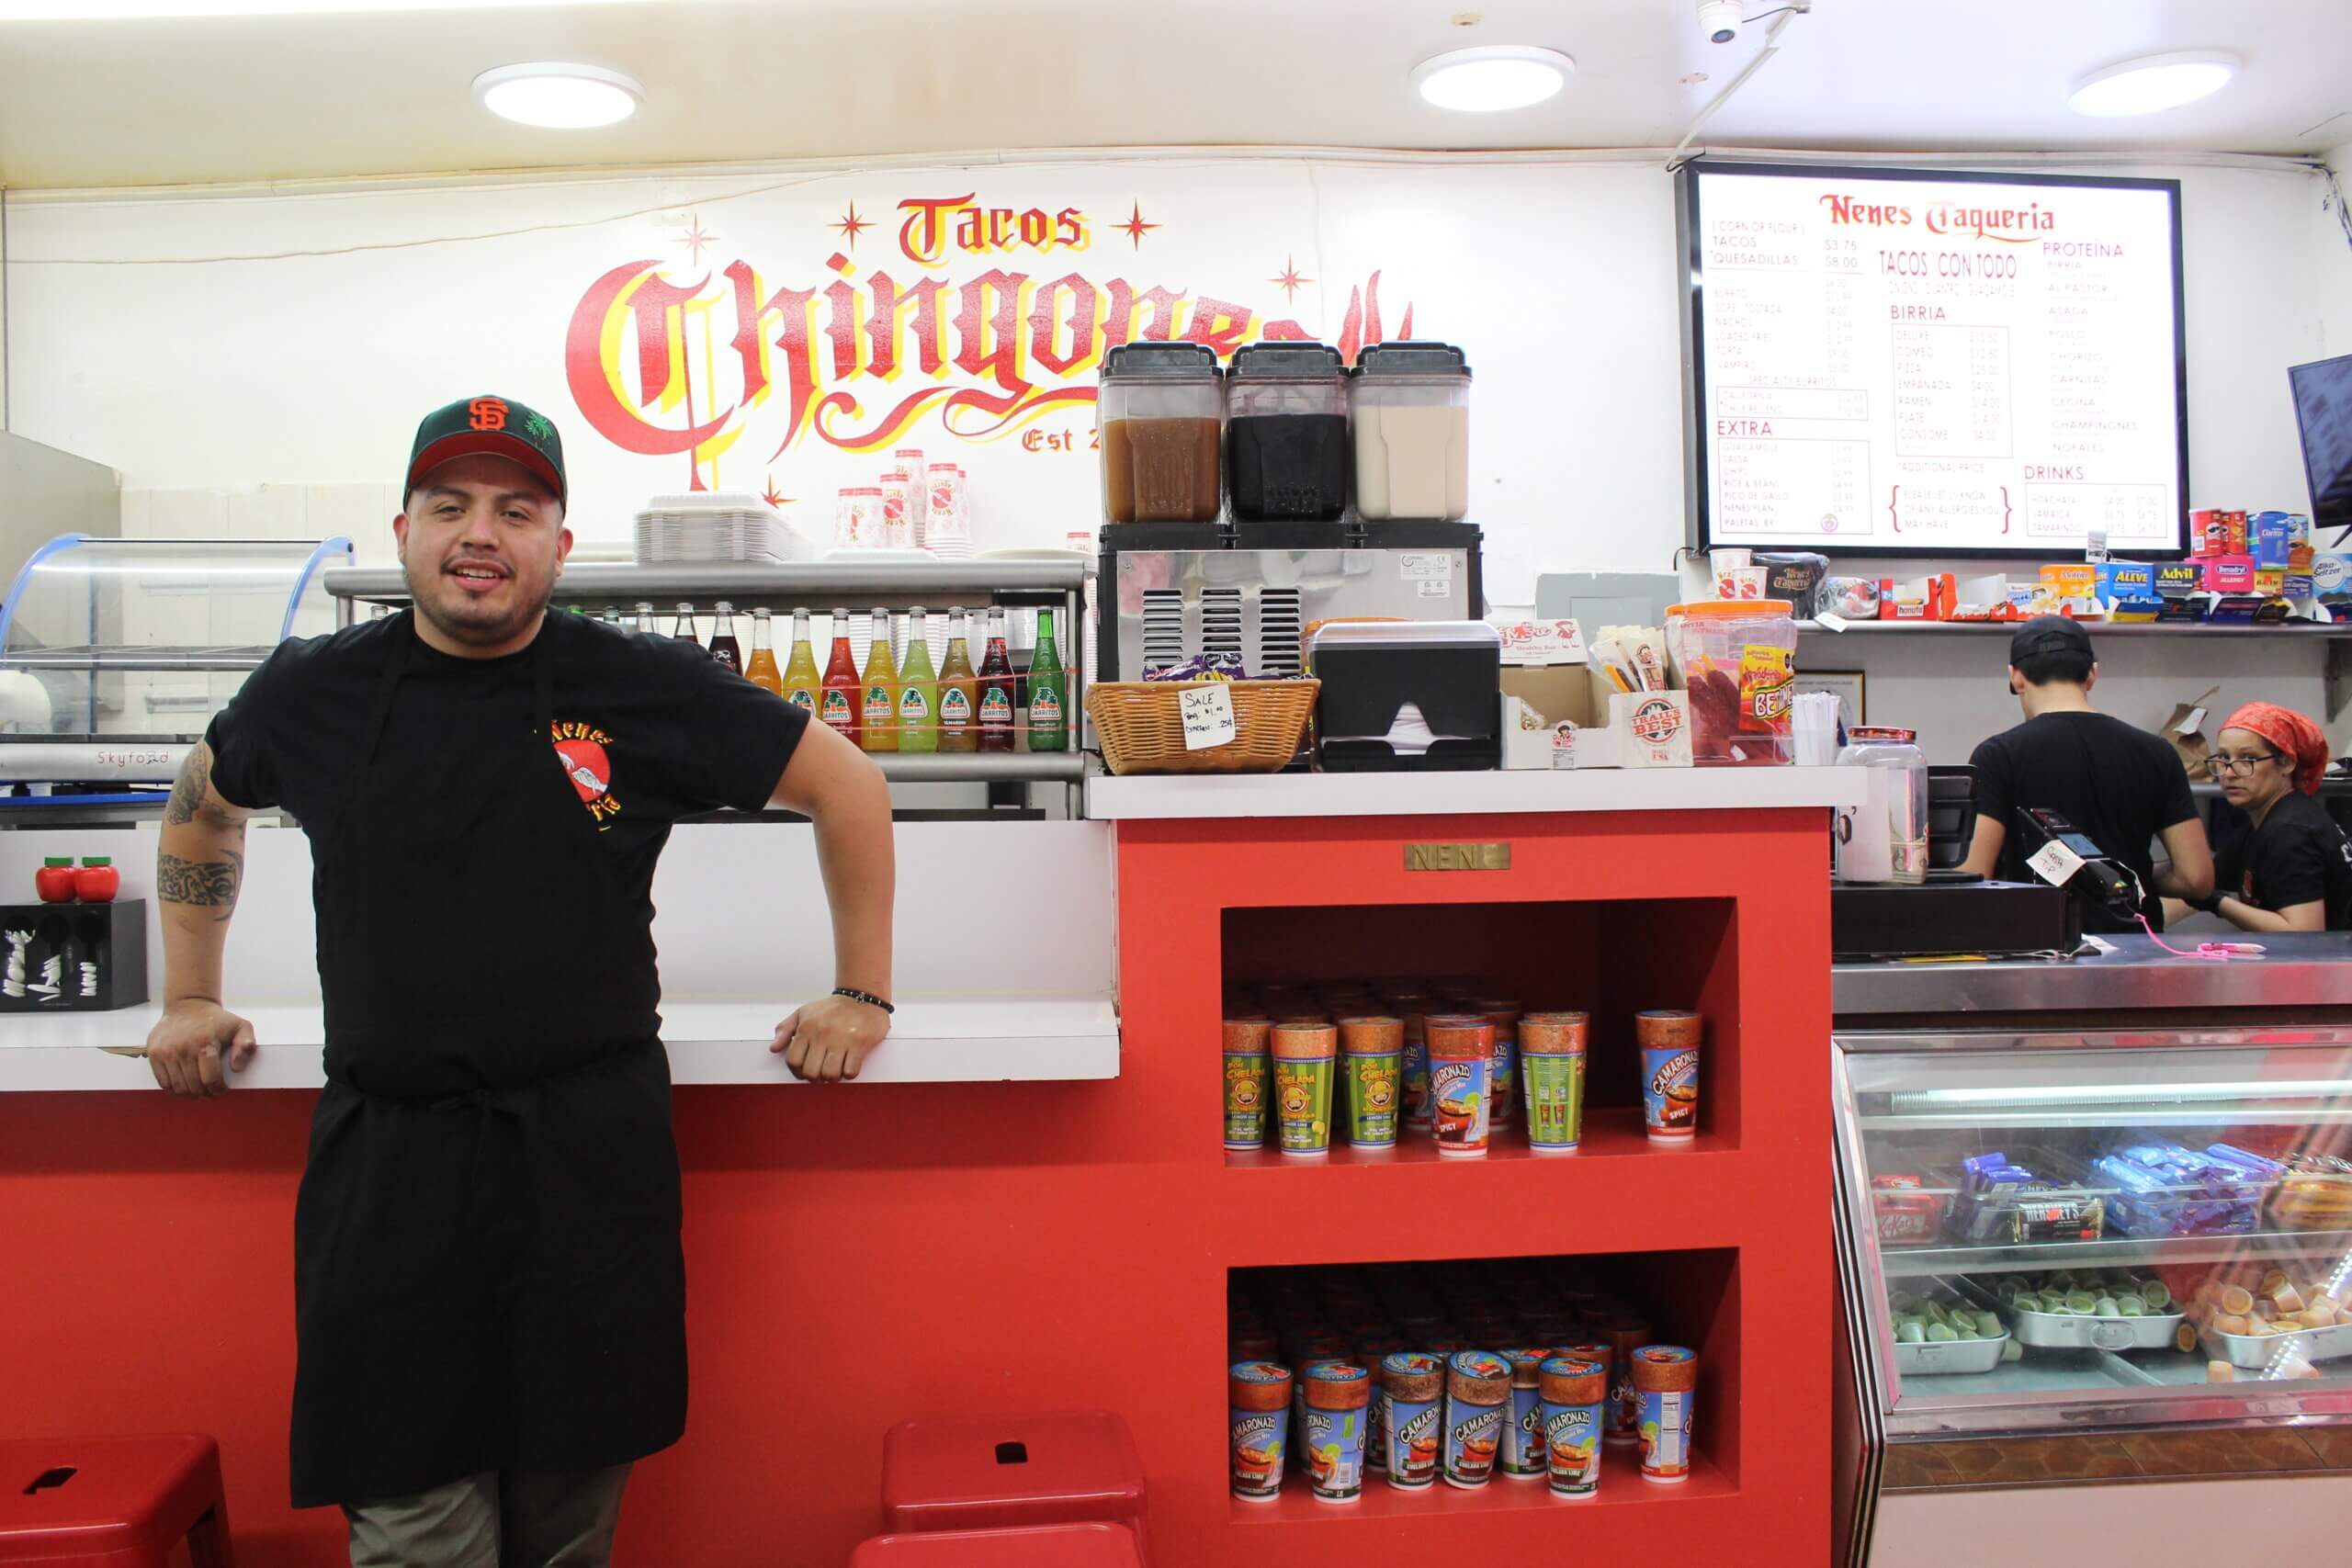 andres at his store